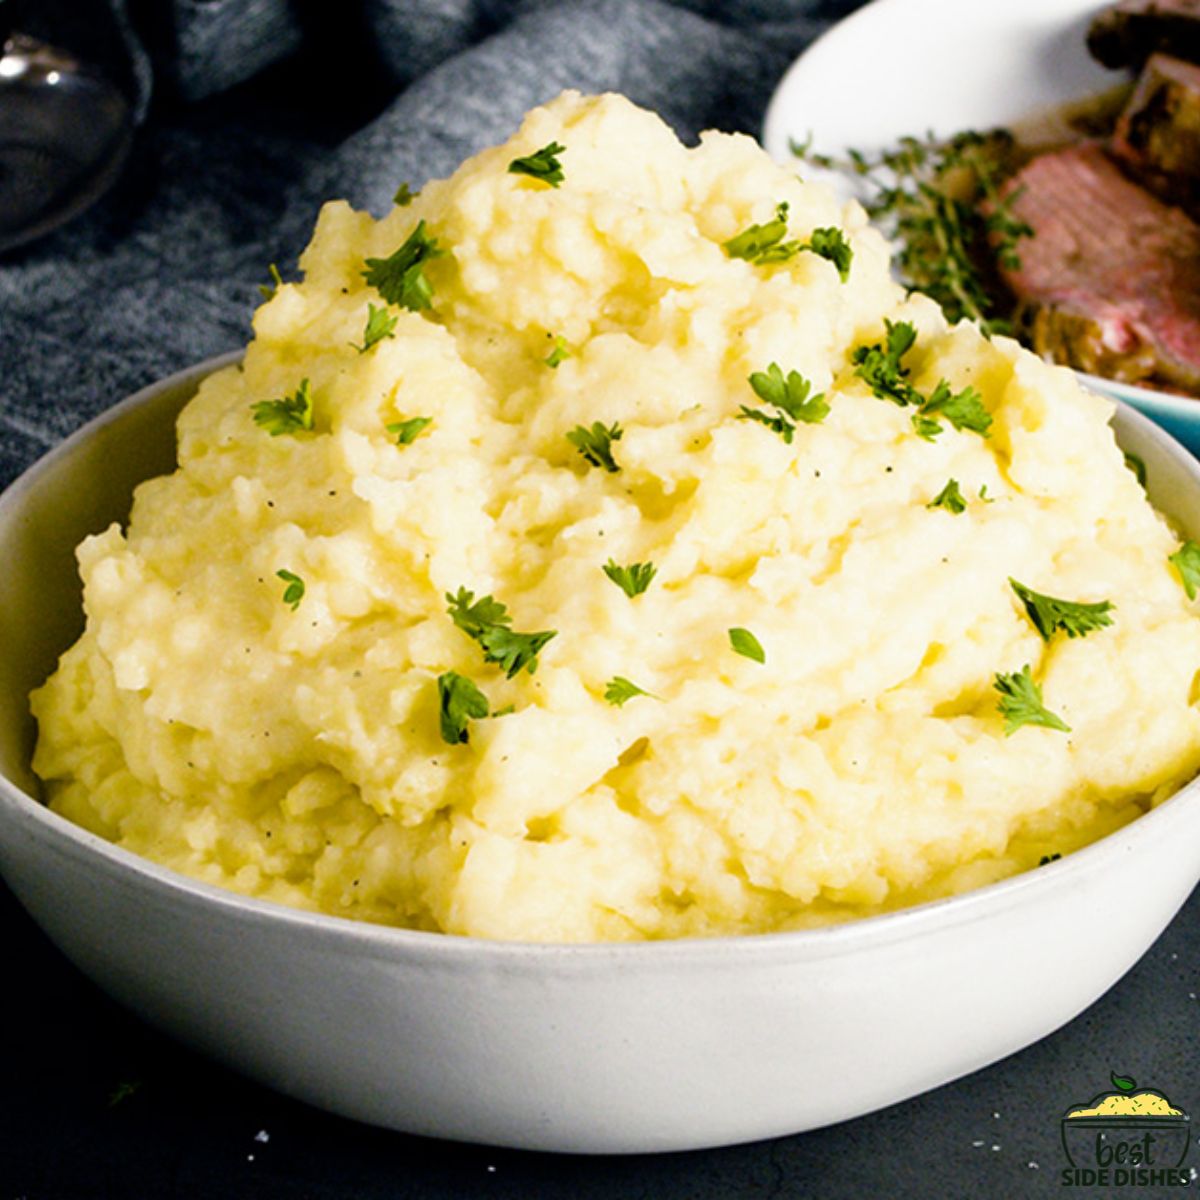 Creamiest mashed potatoes in a white bowl topped with chives